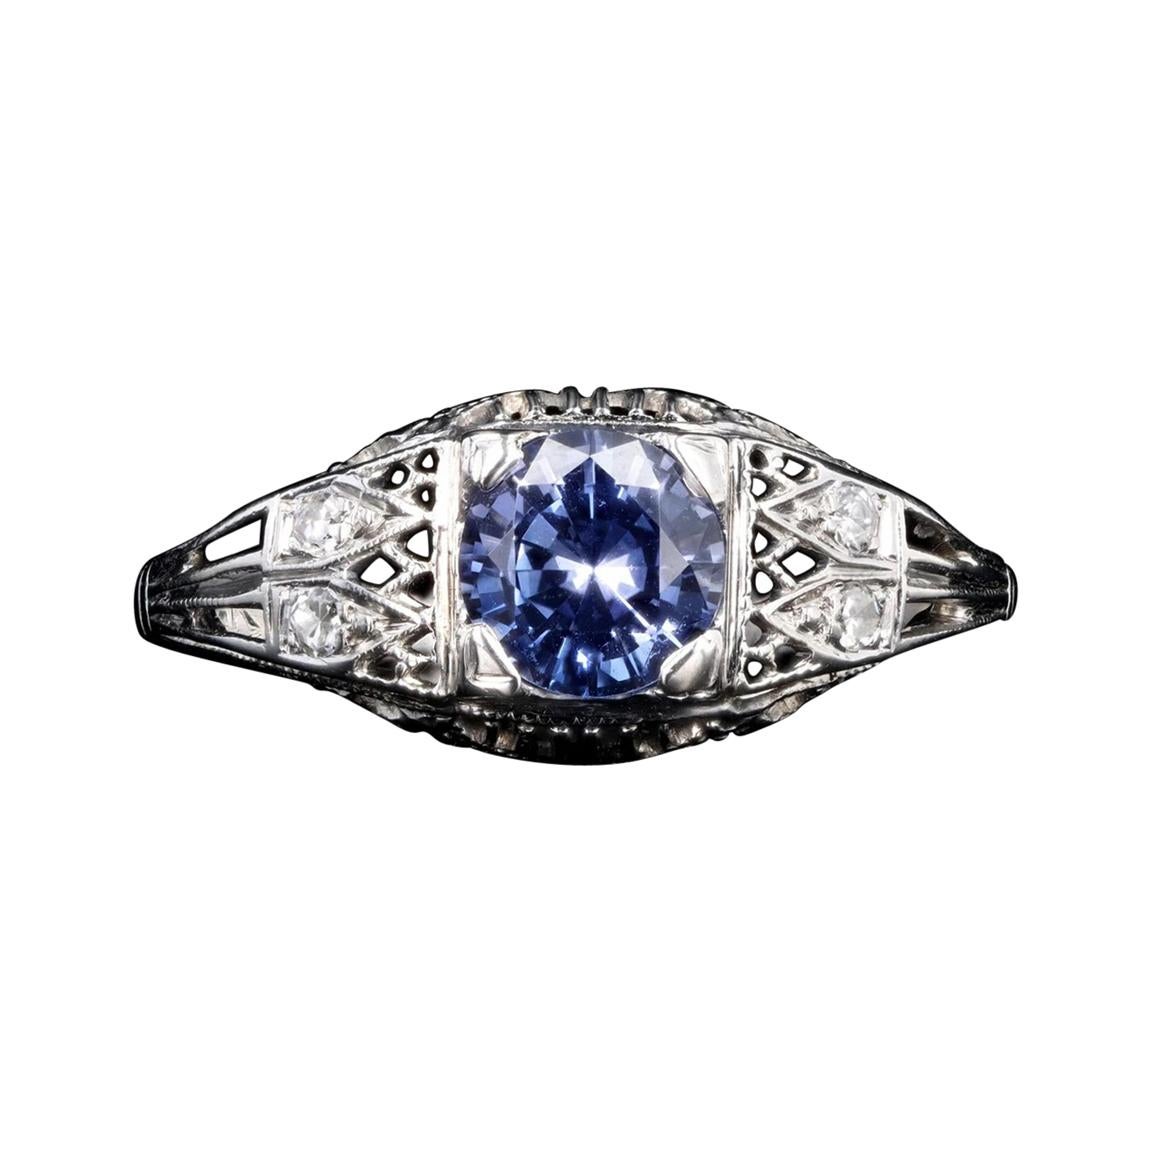 Art Deco 18K White Gold 1.10 Carat Natural Sapphire and Diamond Ring